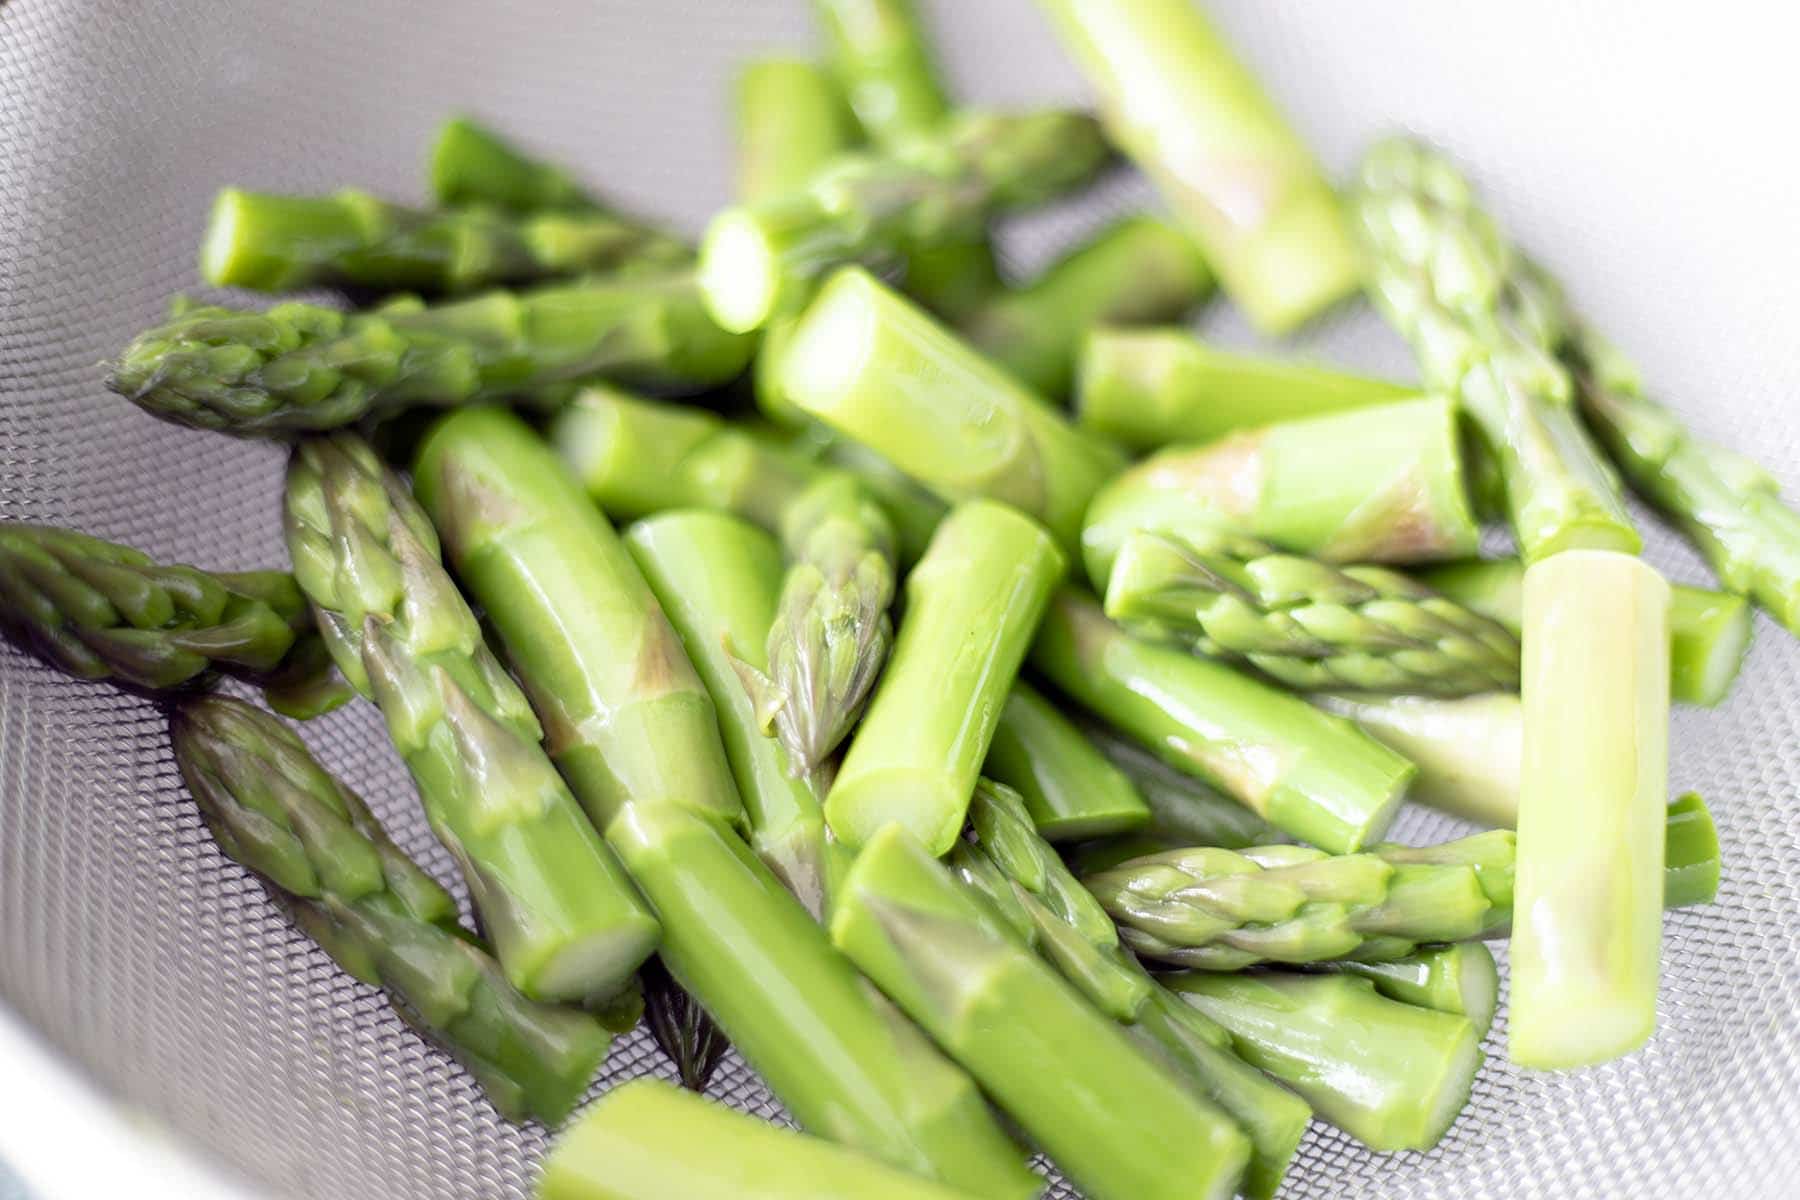 blanched asparagus in sieve